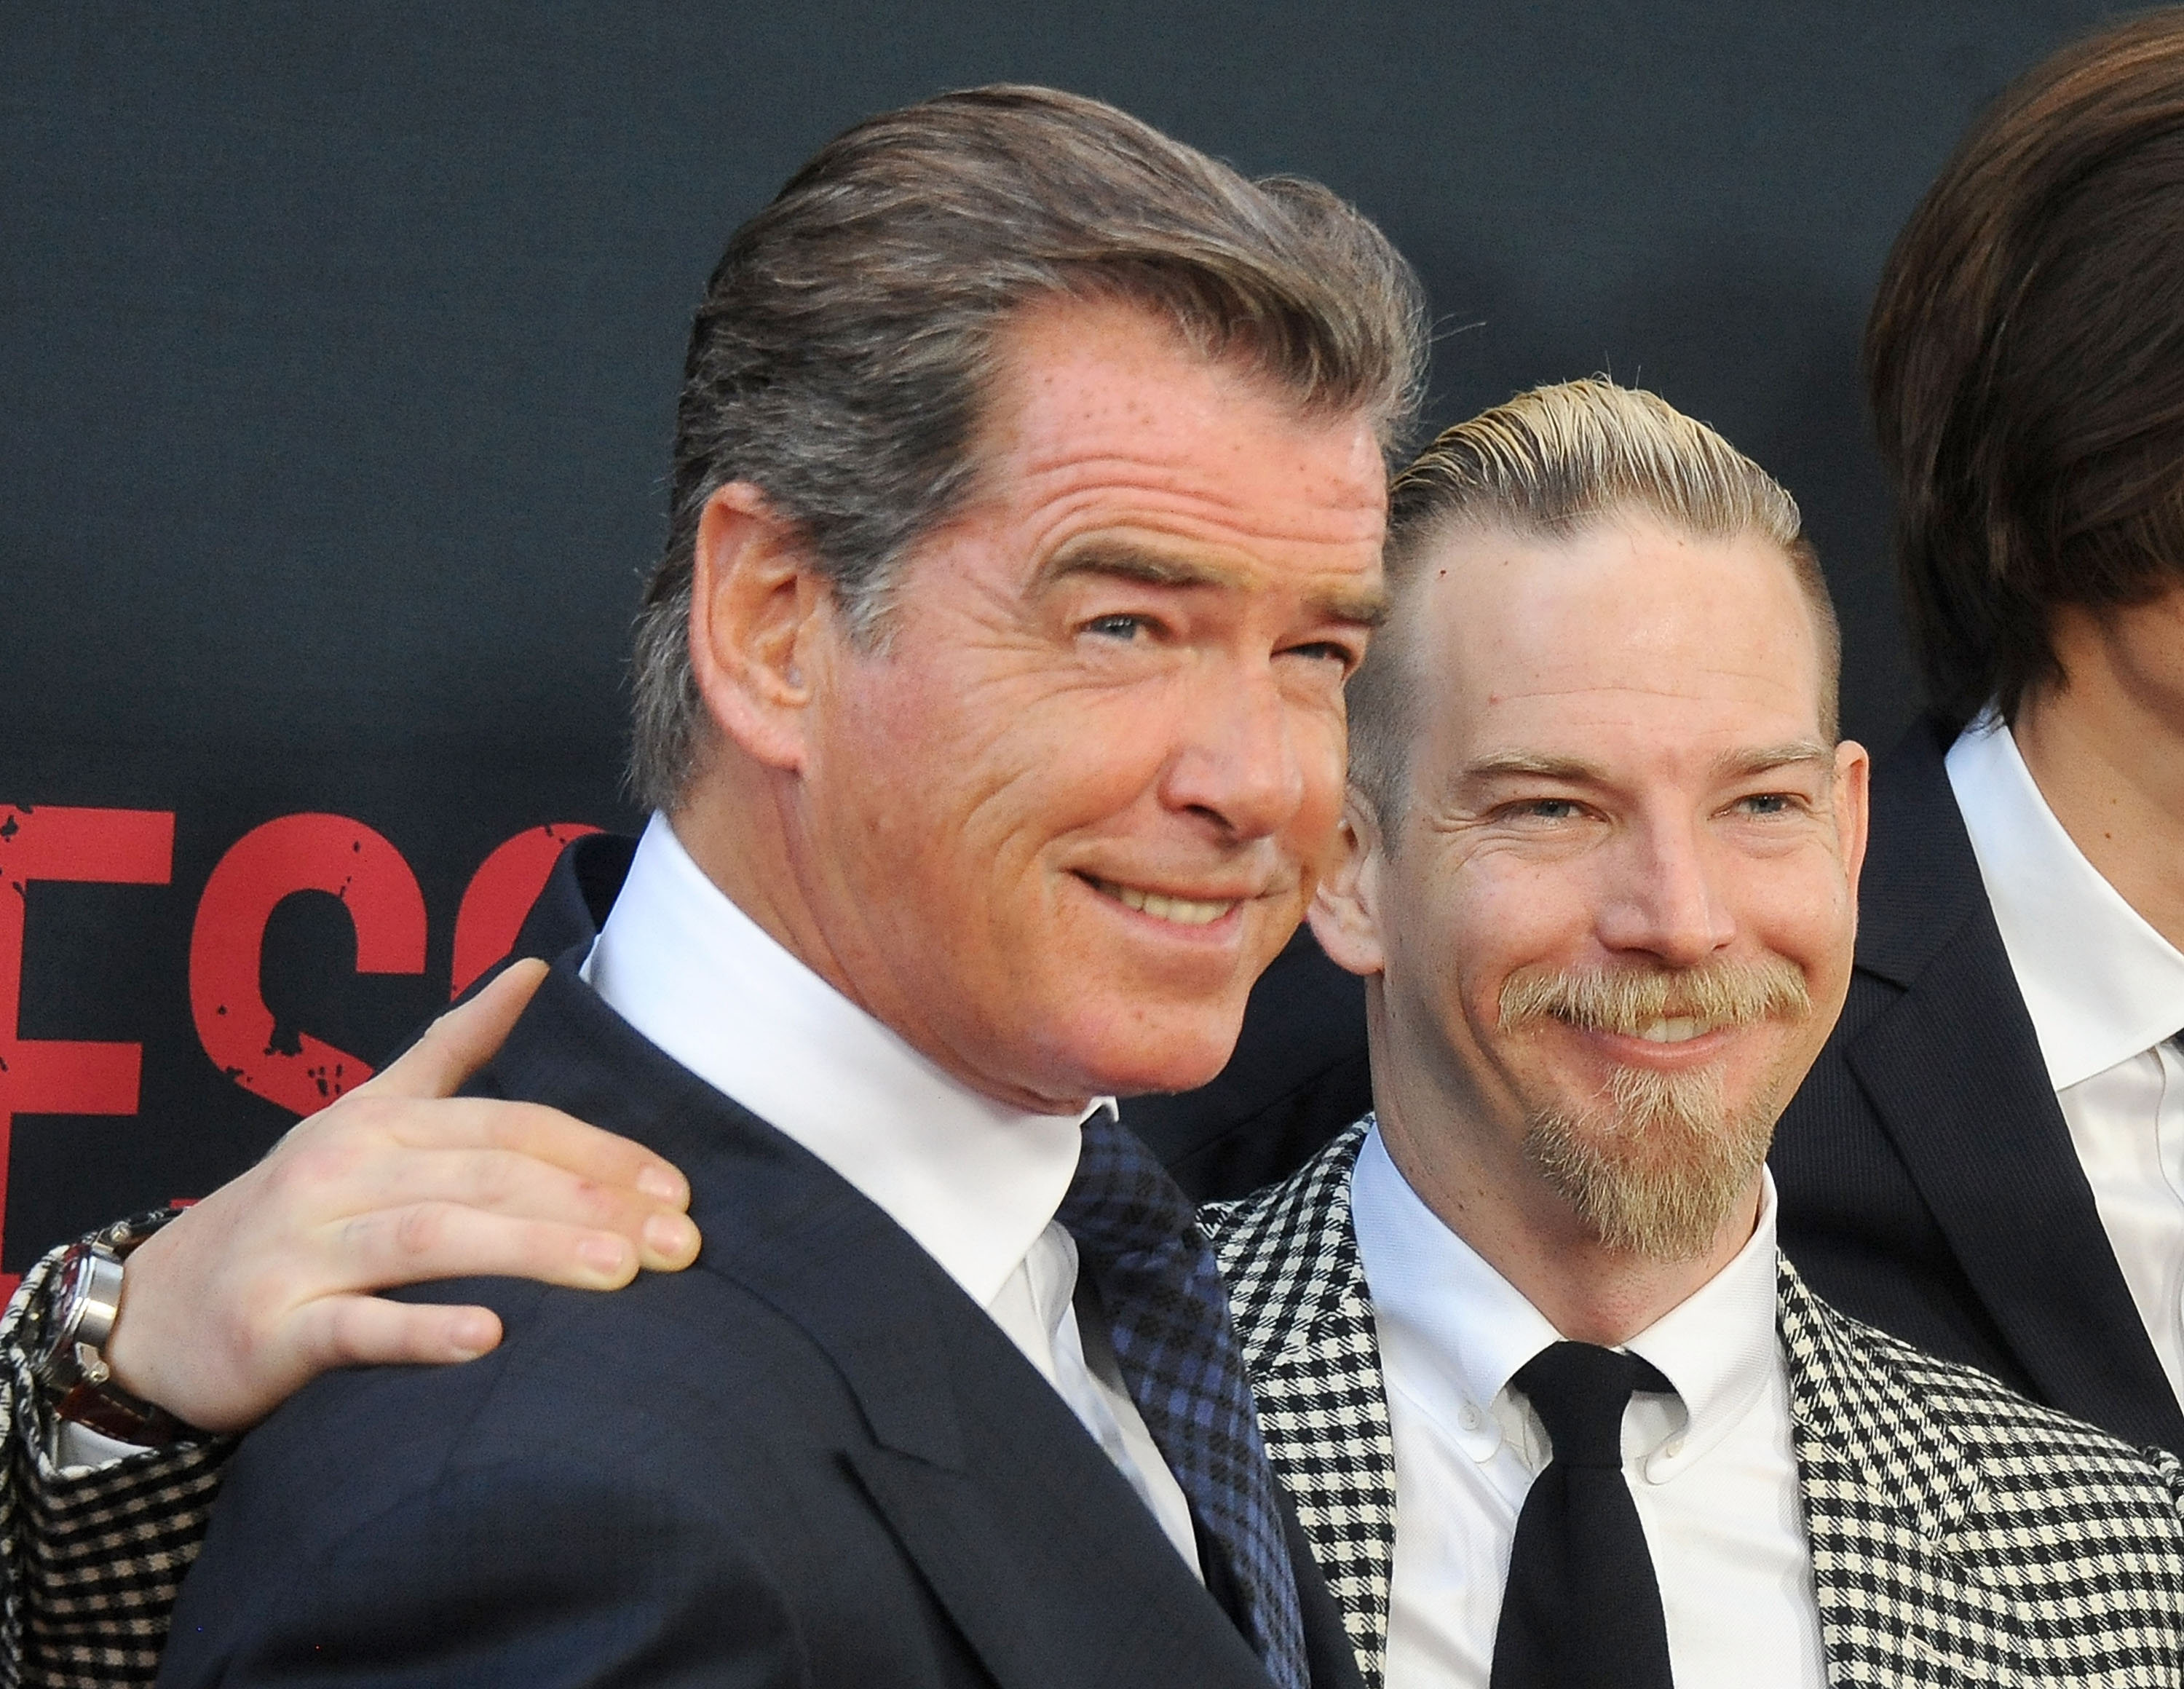 Pierce and Sean Brosnan during the premiere of "No Escape" on August 17, 2015 in Los Angeles, California | Source: Getty Images